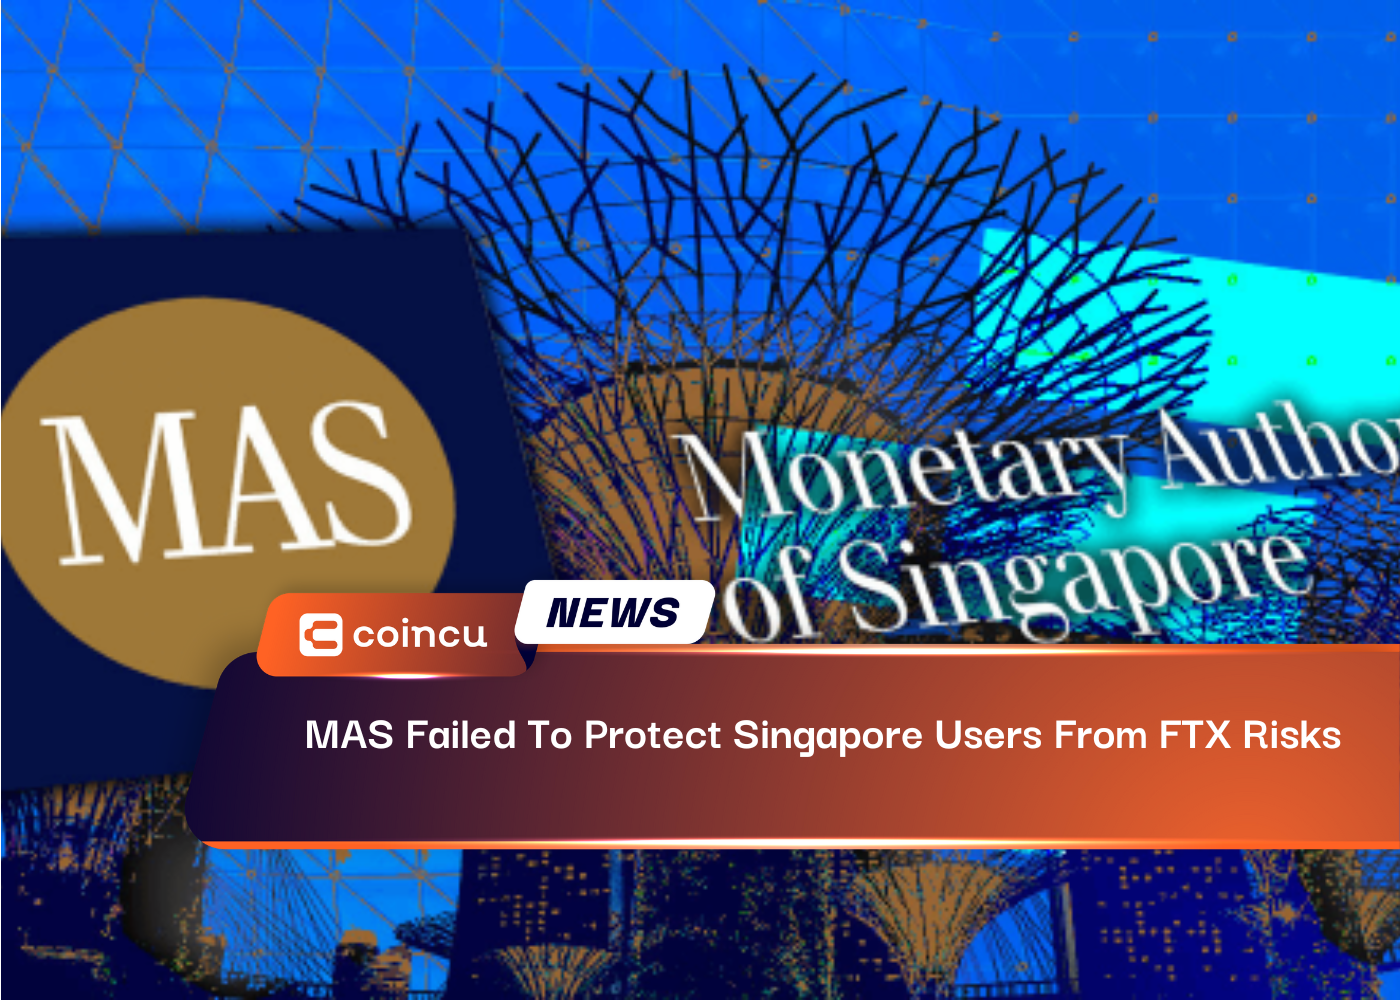 MAS Failed To Protect Singapore Users From FTX Risks